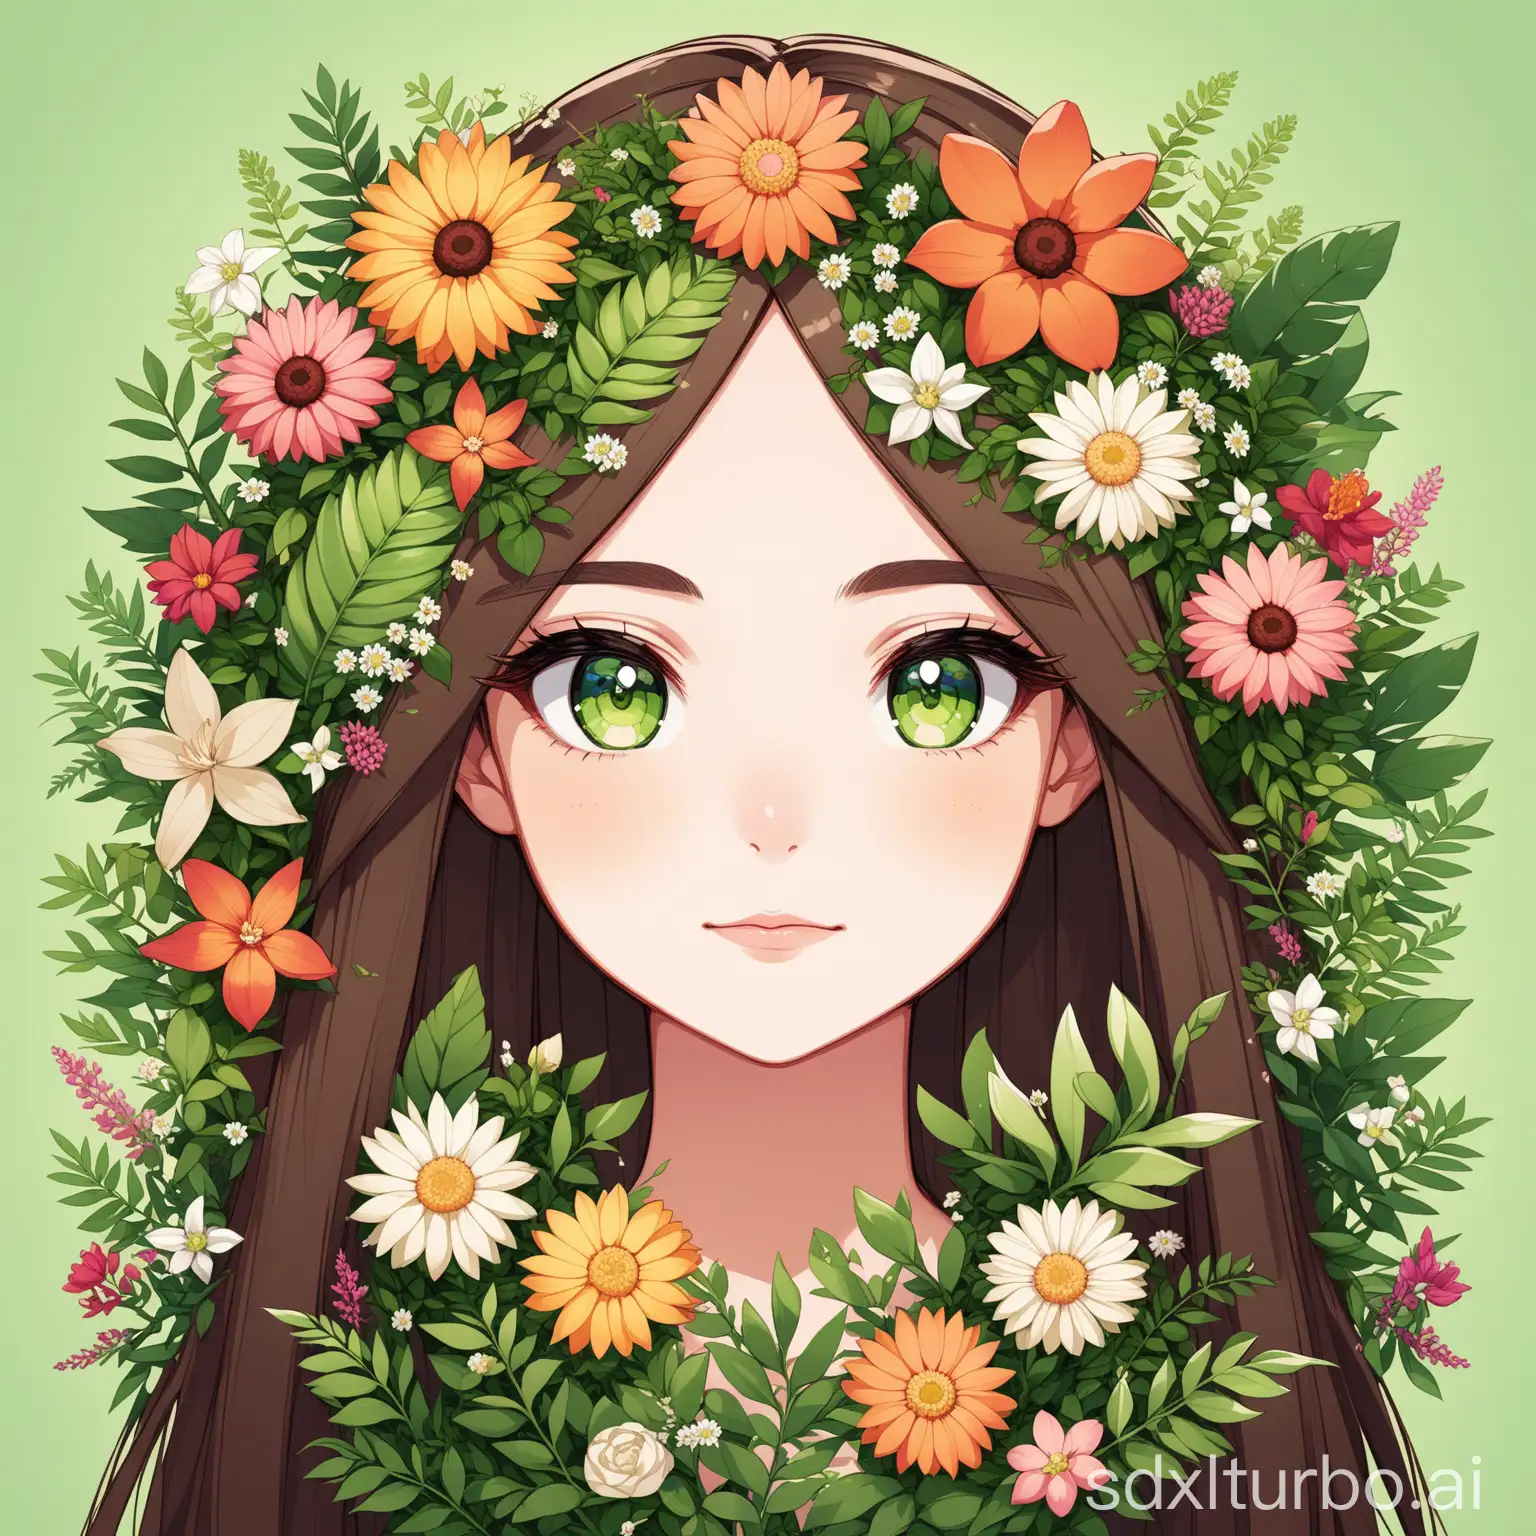 A cartoon portrait of a girl generated from flowers and plant specimens.